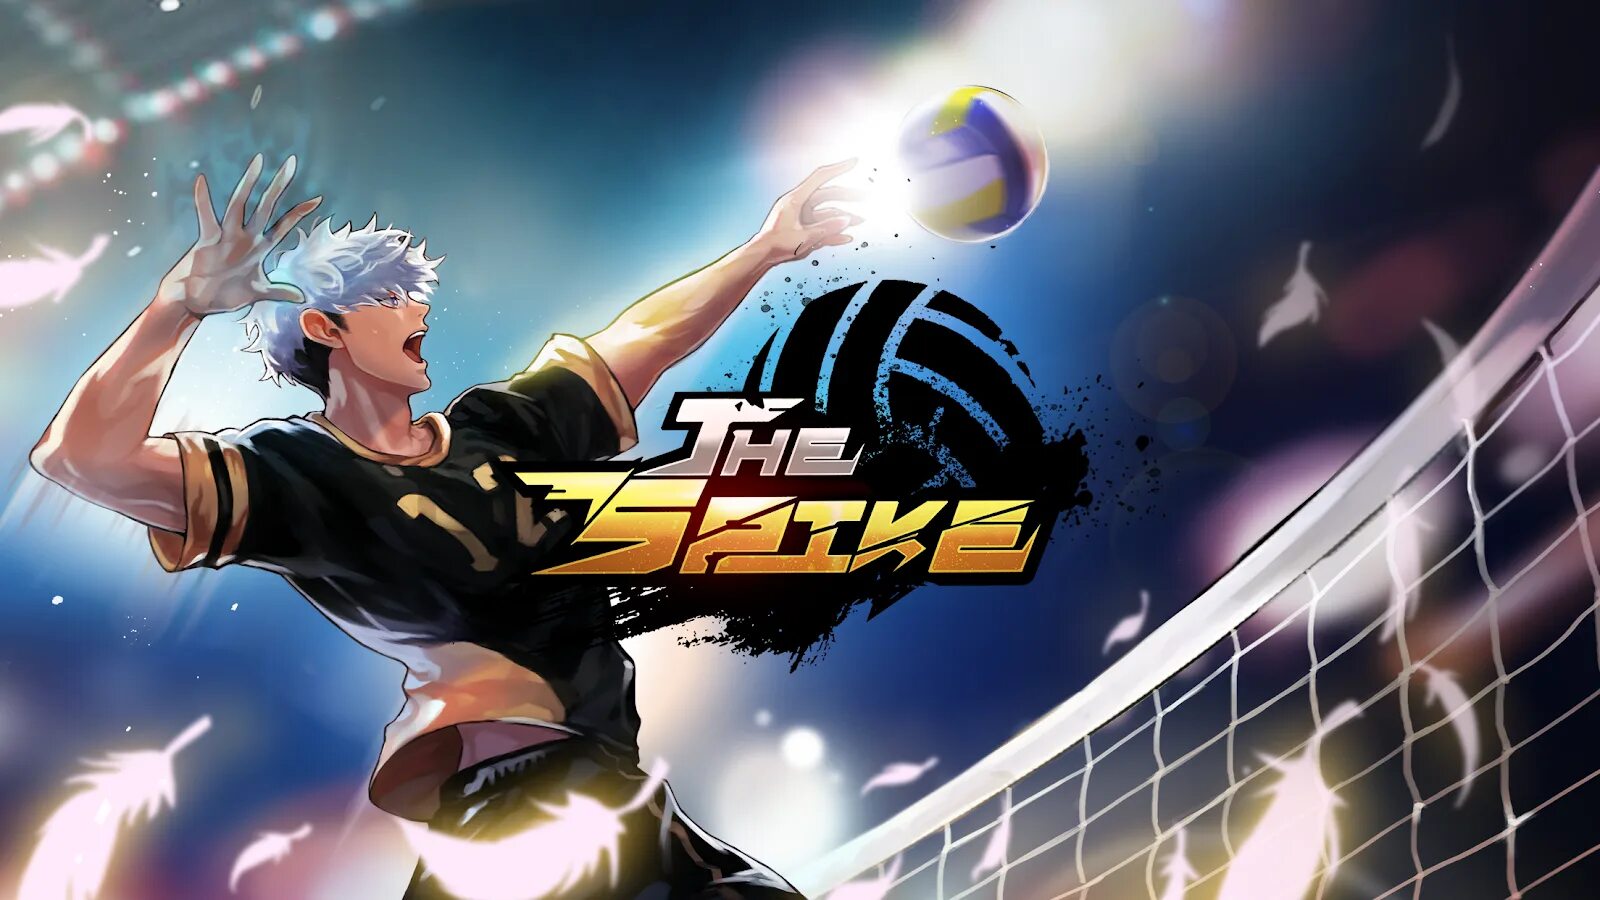 Промокоды the spike volleyball story. Игра the Spike. The Spike Volleyball игра. The Spike Volleyball story. Nishikawa волейбол the Spike.